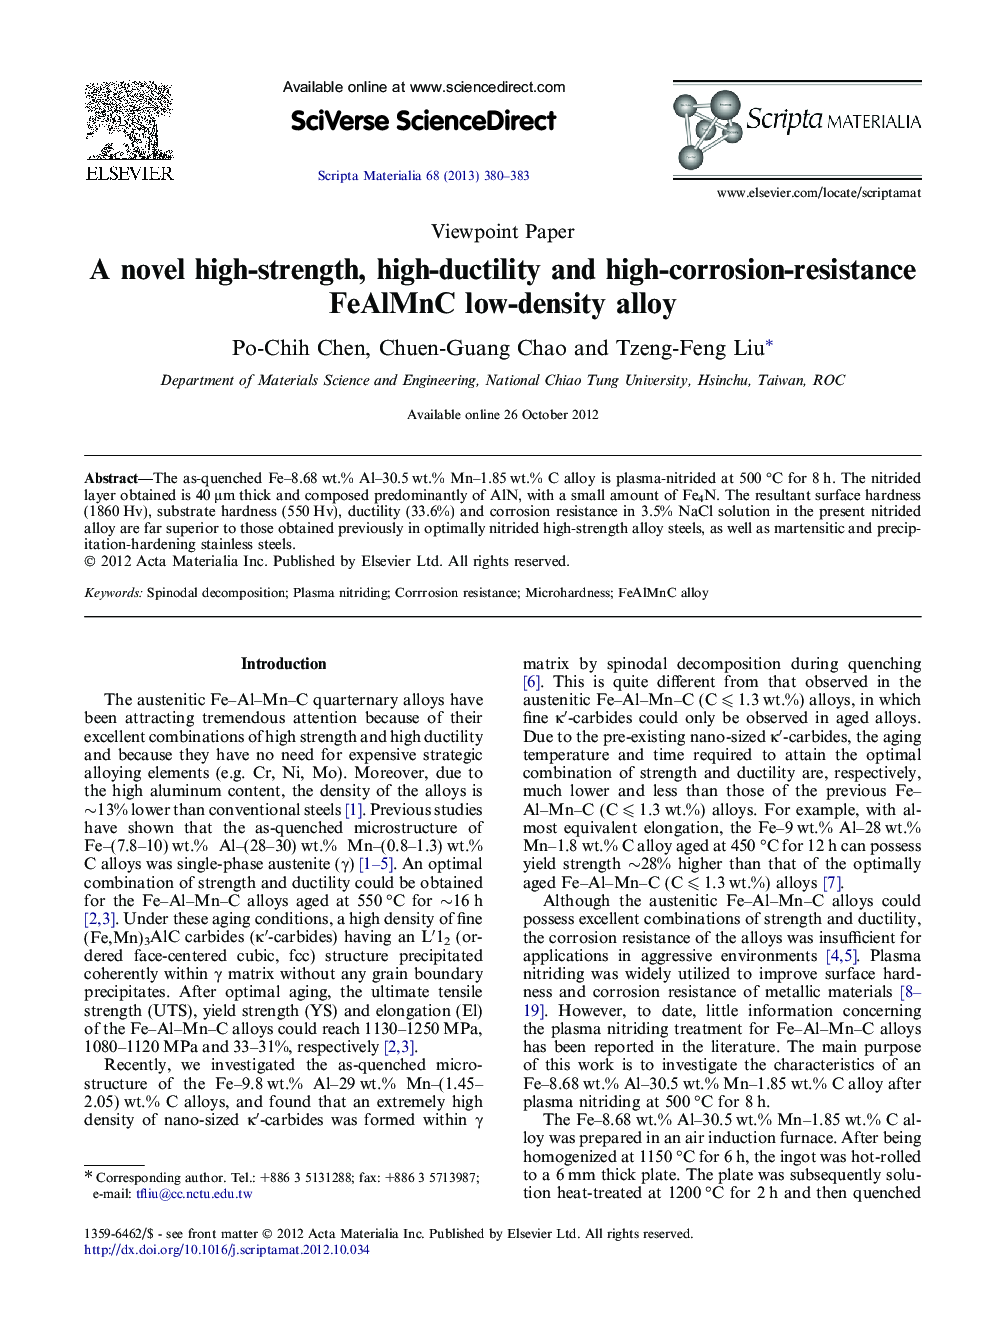 A novel high-strength, high-ductility and high-corrosion-resistance FeAlMnC low-density alloy